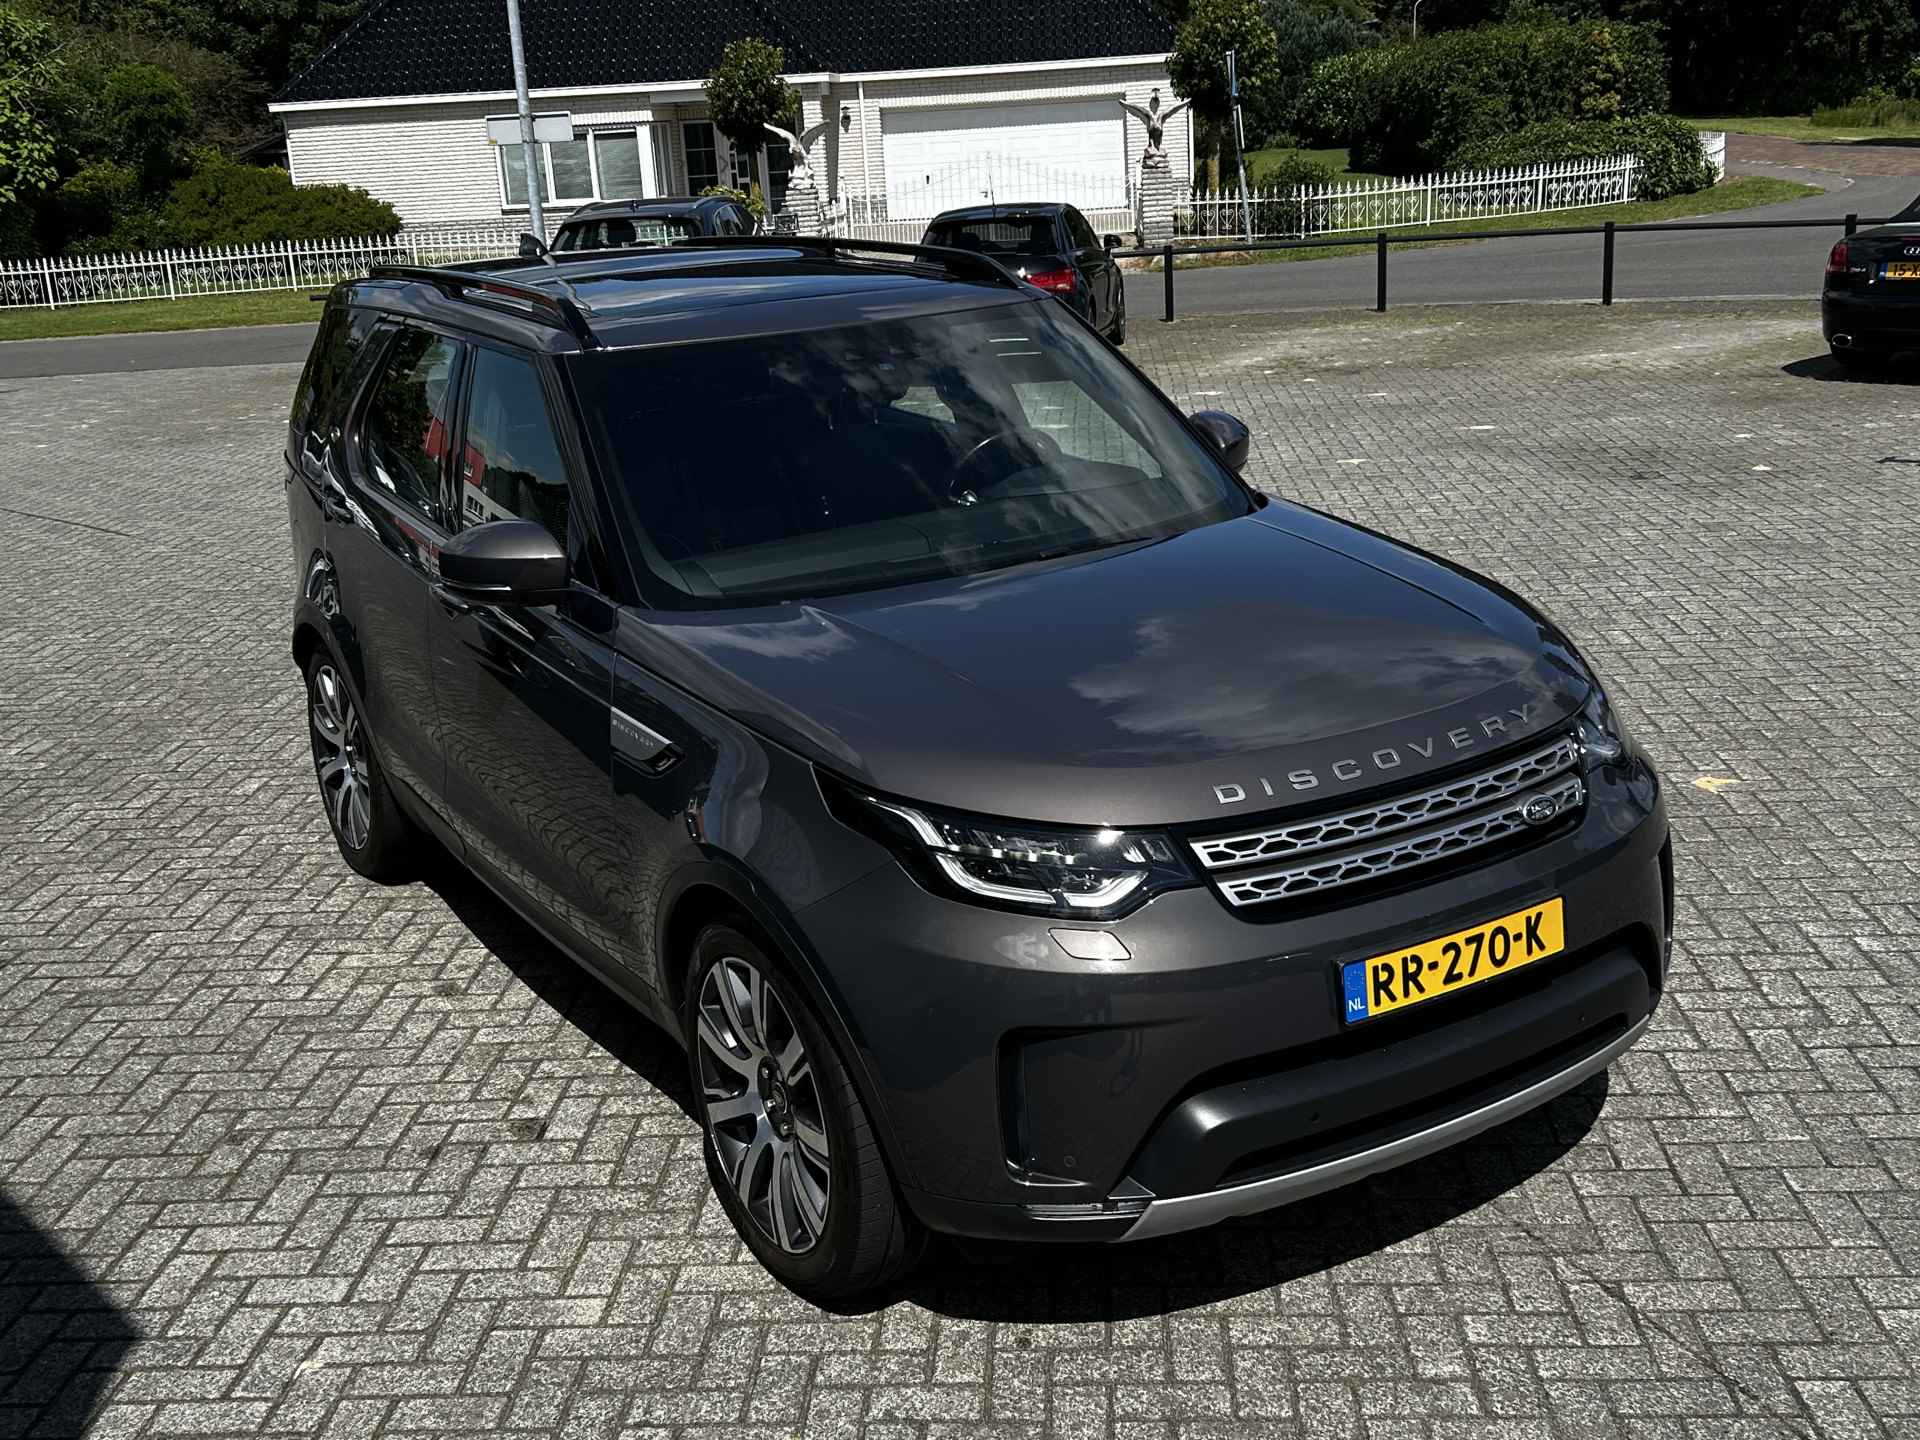 Land Rover Discovery 2.0 Sd4 HSE Luxury 7p. Navi/Clima/Leder/Panodak/7-Persoons/Luchtvering/Trekhaak - 6/48